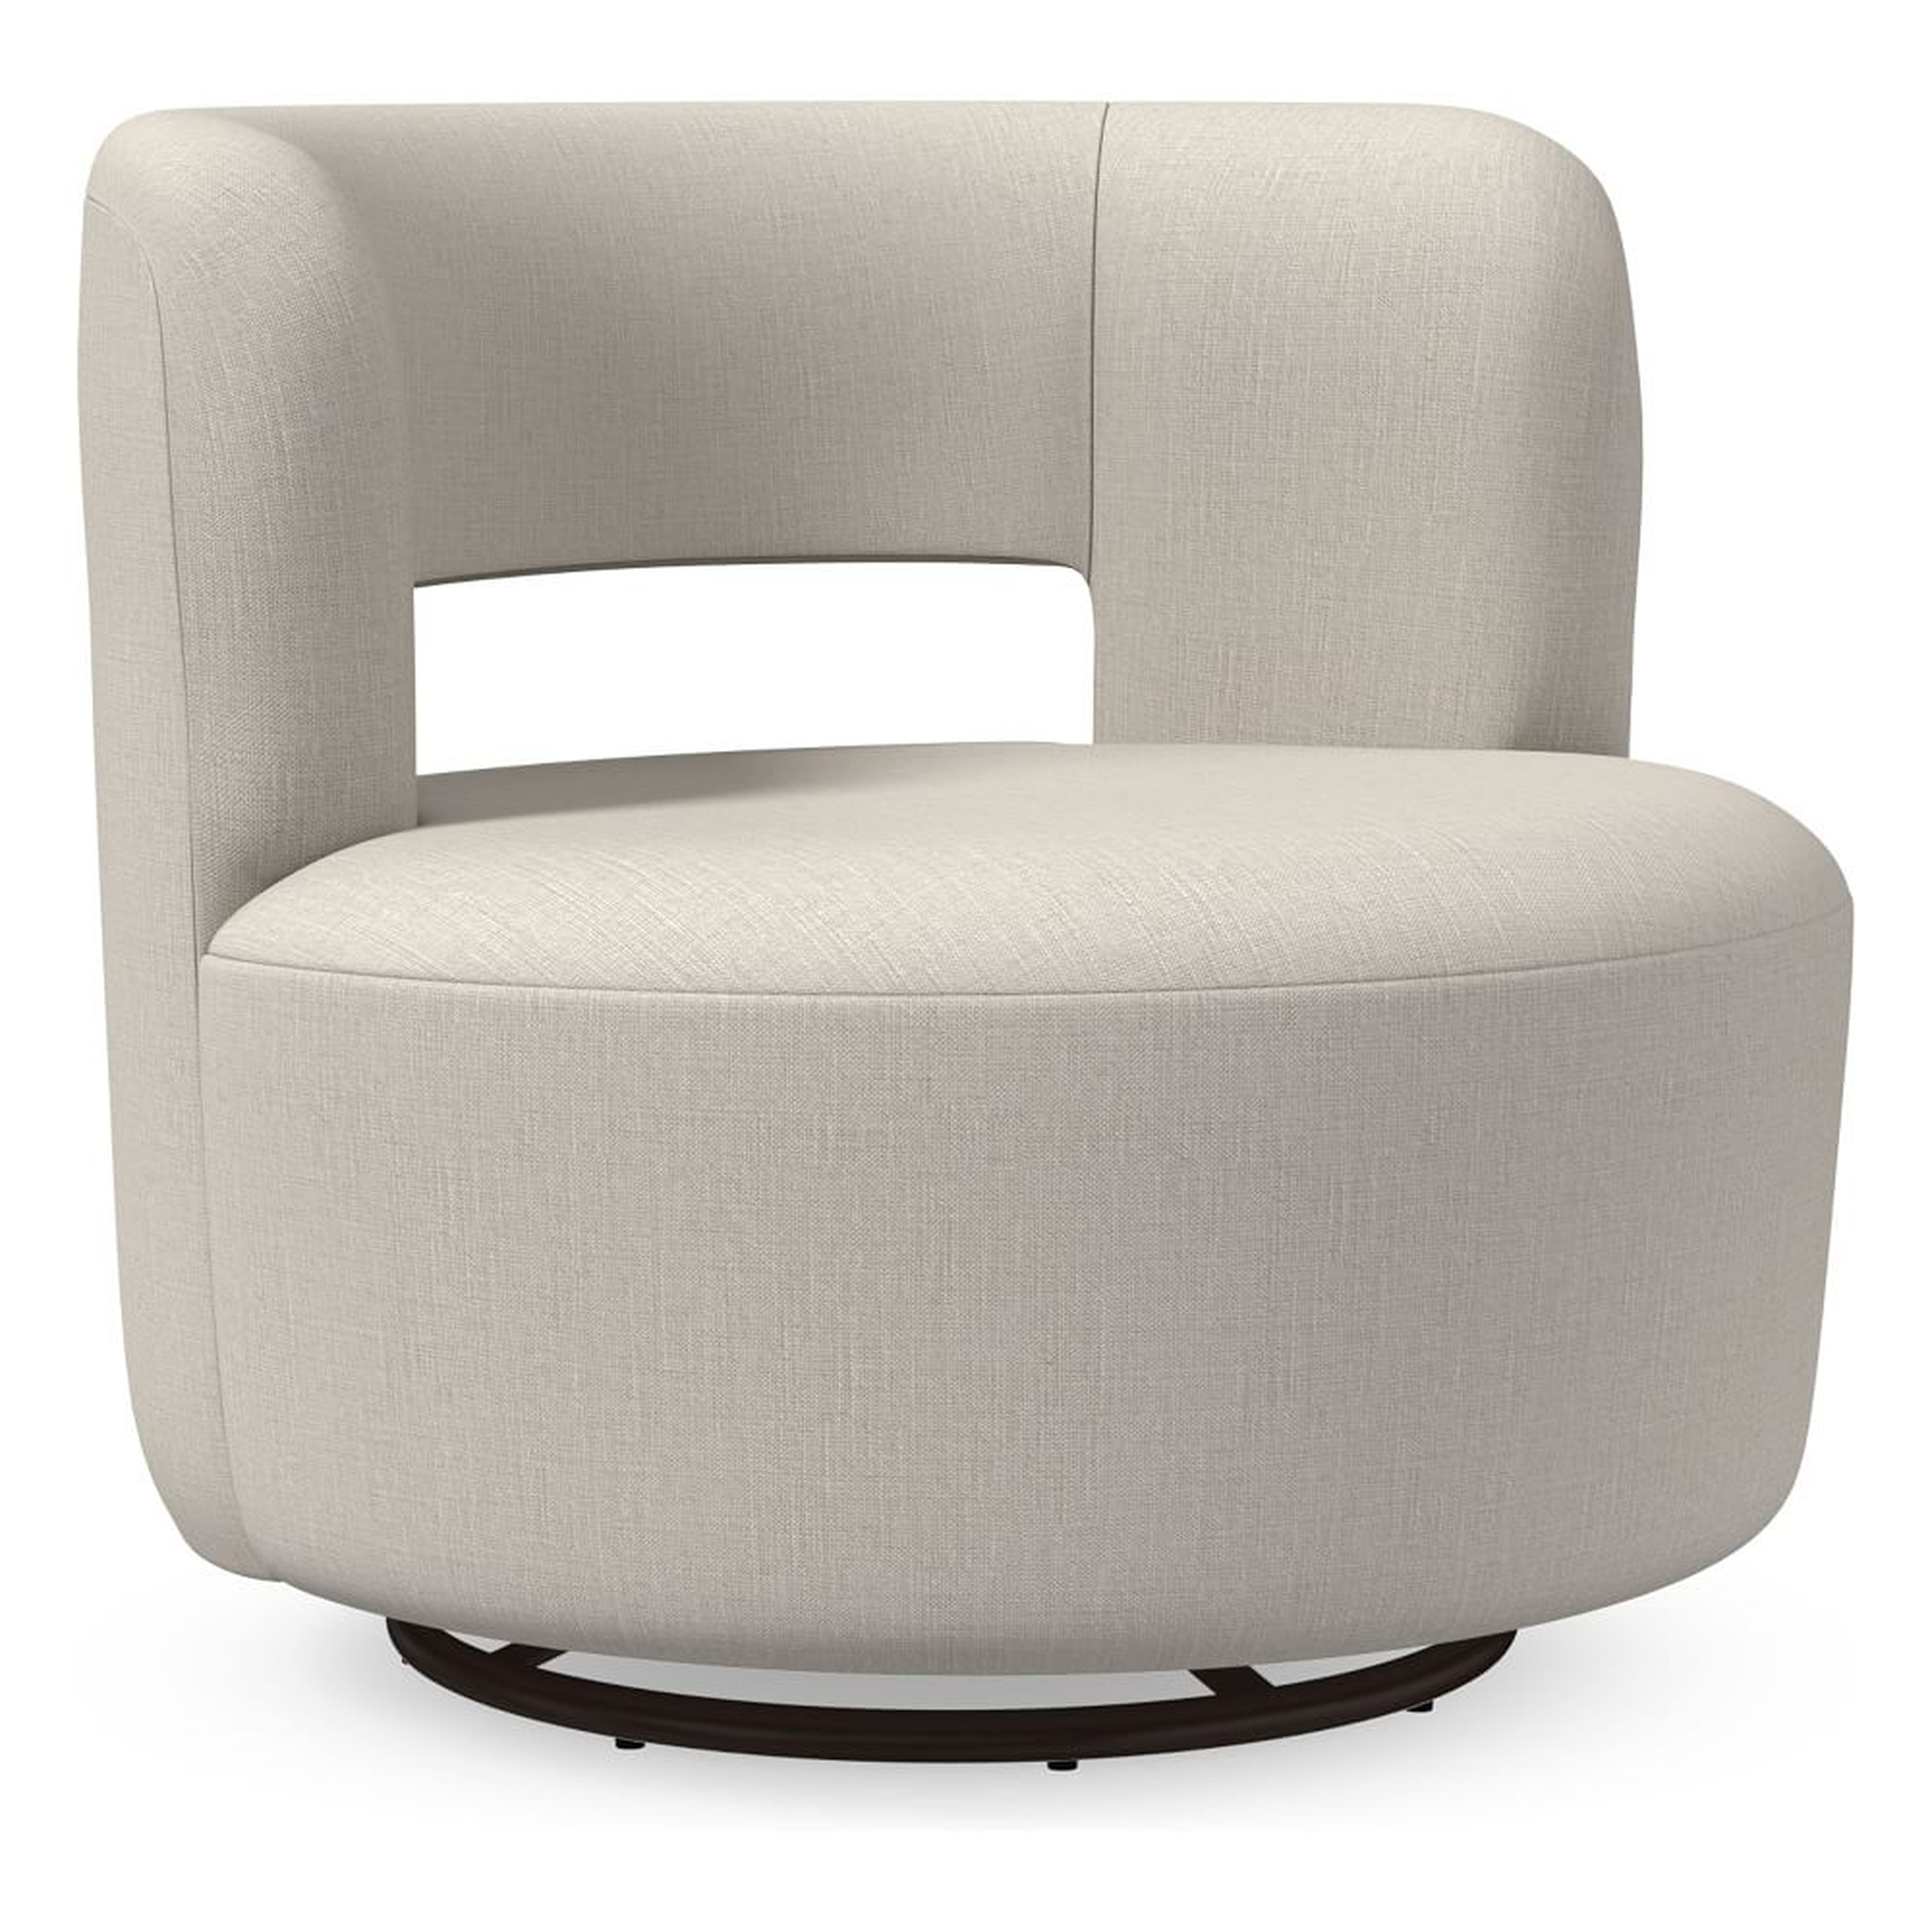 Millie Swivel Chair, Poly, Yarn Dyed Linen Weave, Alabaster, Concealed Supports - West Elm